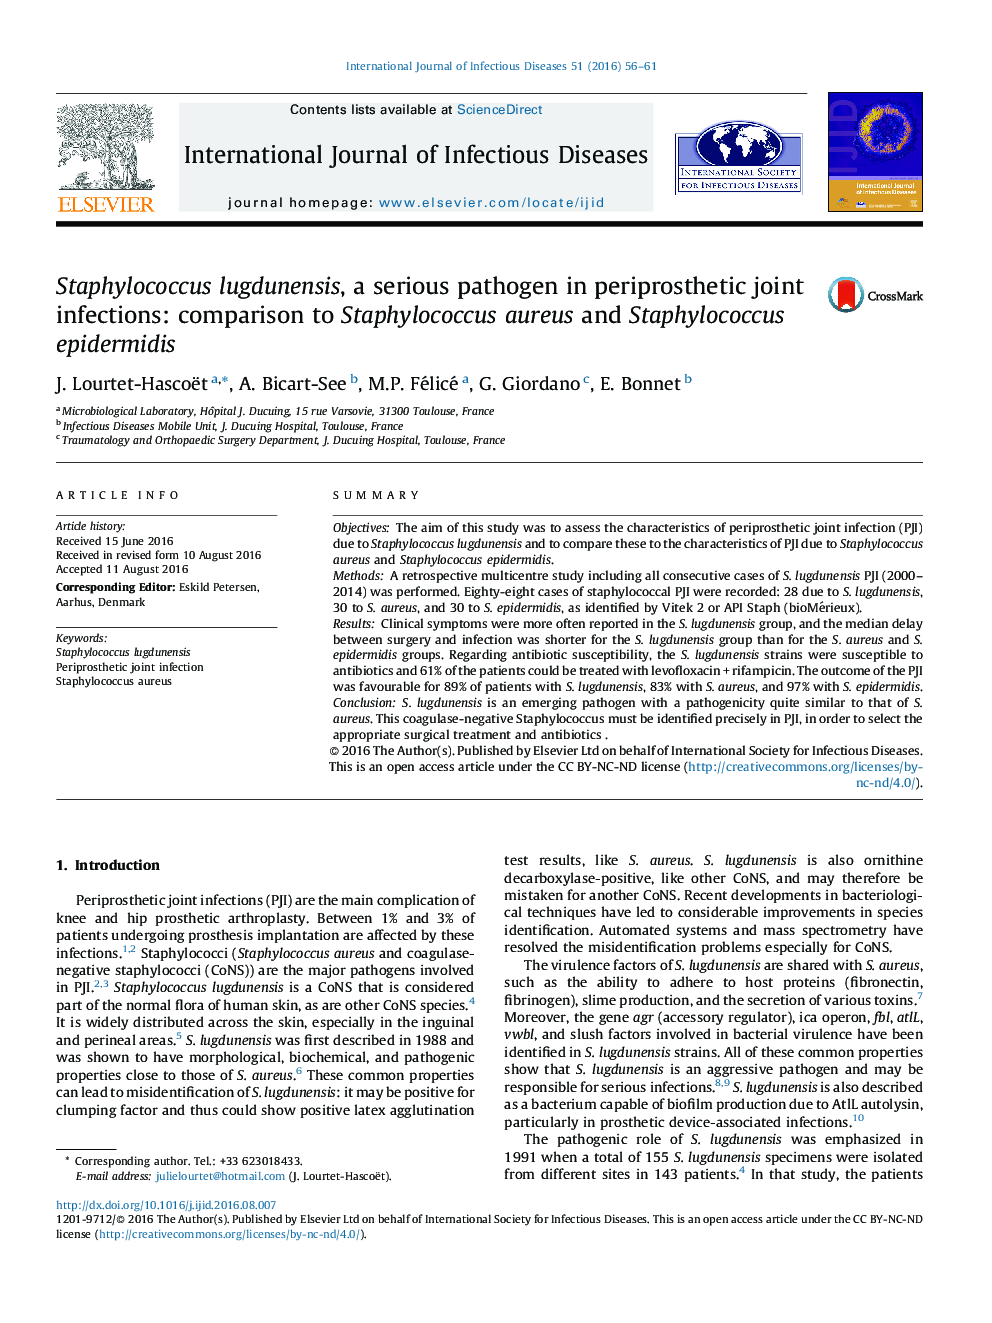 Staphylococcus lugdunensis, a serious pathogen in periprosthetic joint infections: comparison to Staphylococcus aureus and Staphylococcus epidermidis